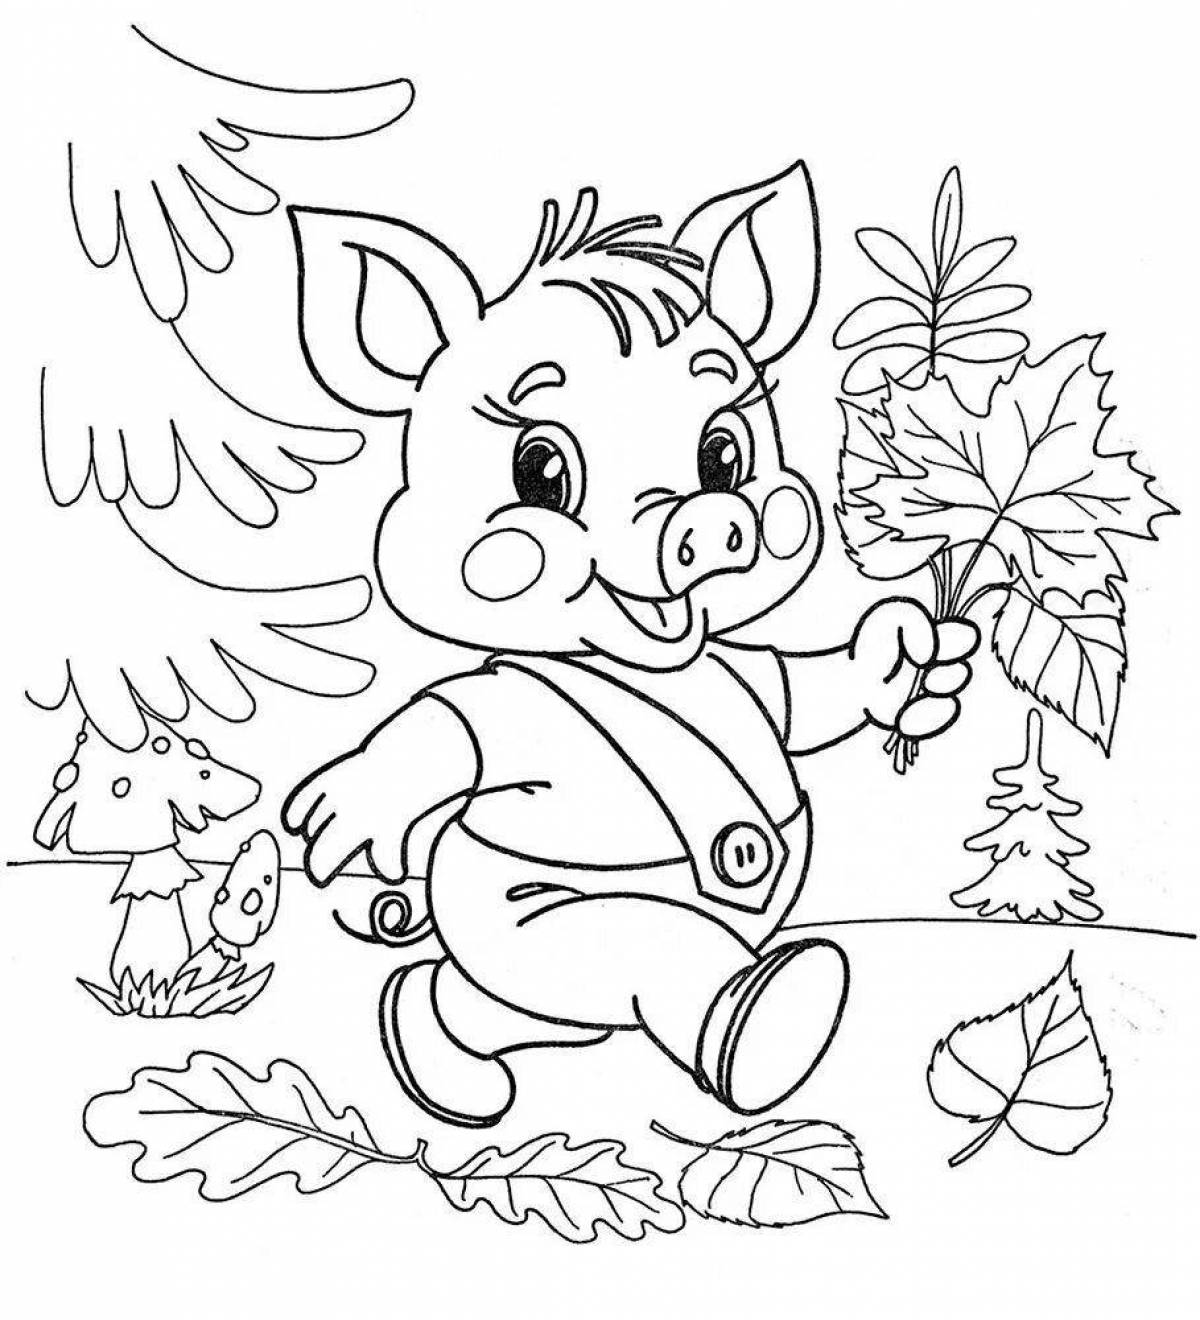 Fun autumn coloring for children 5-6 years old